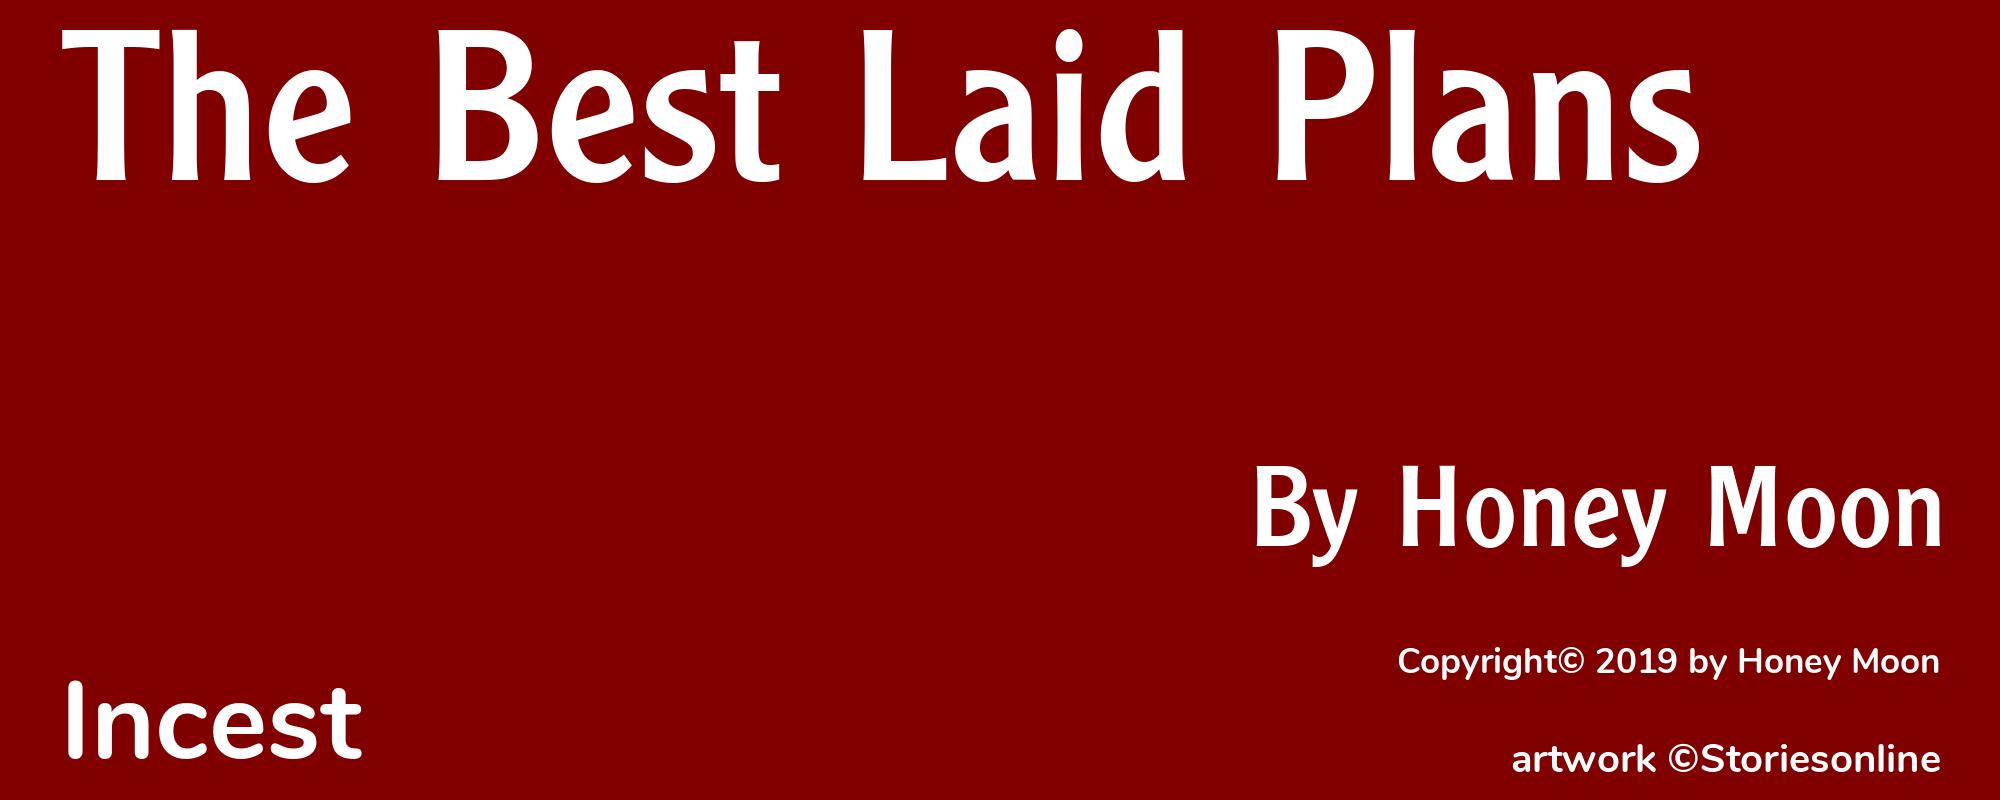 The Best Laid Plans - Cover